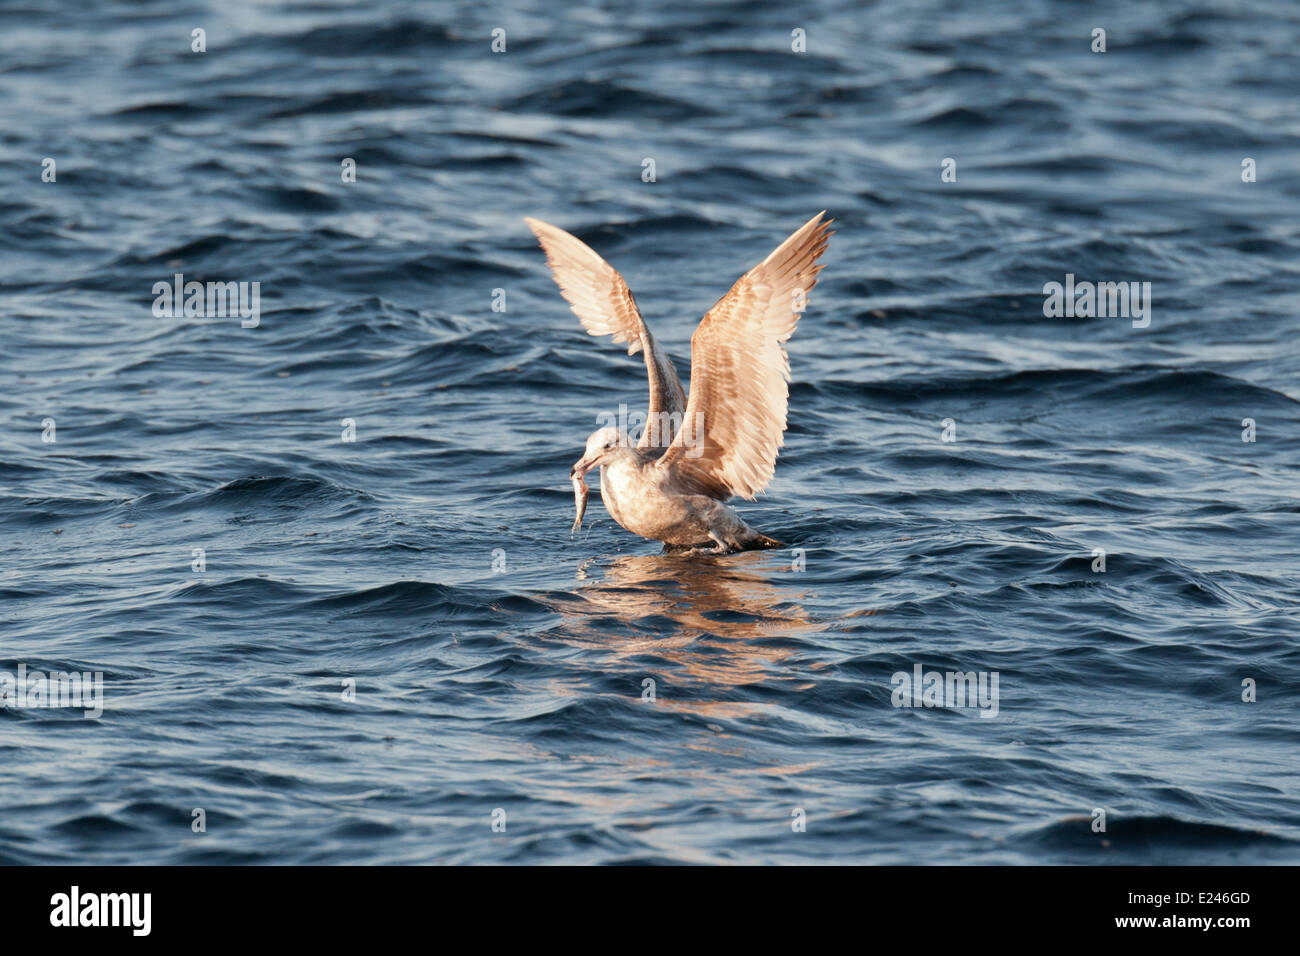 Gull, taking off with fish in its beak, Monterey, California, Pacific Ocean. Stock Photo